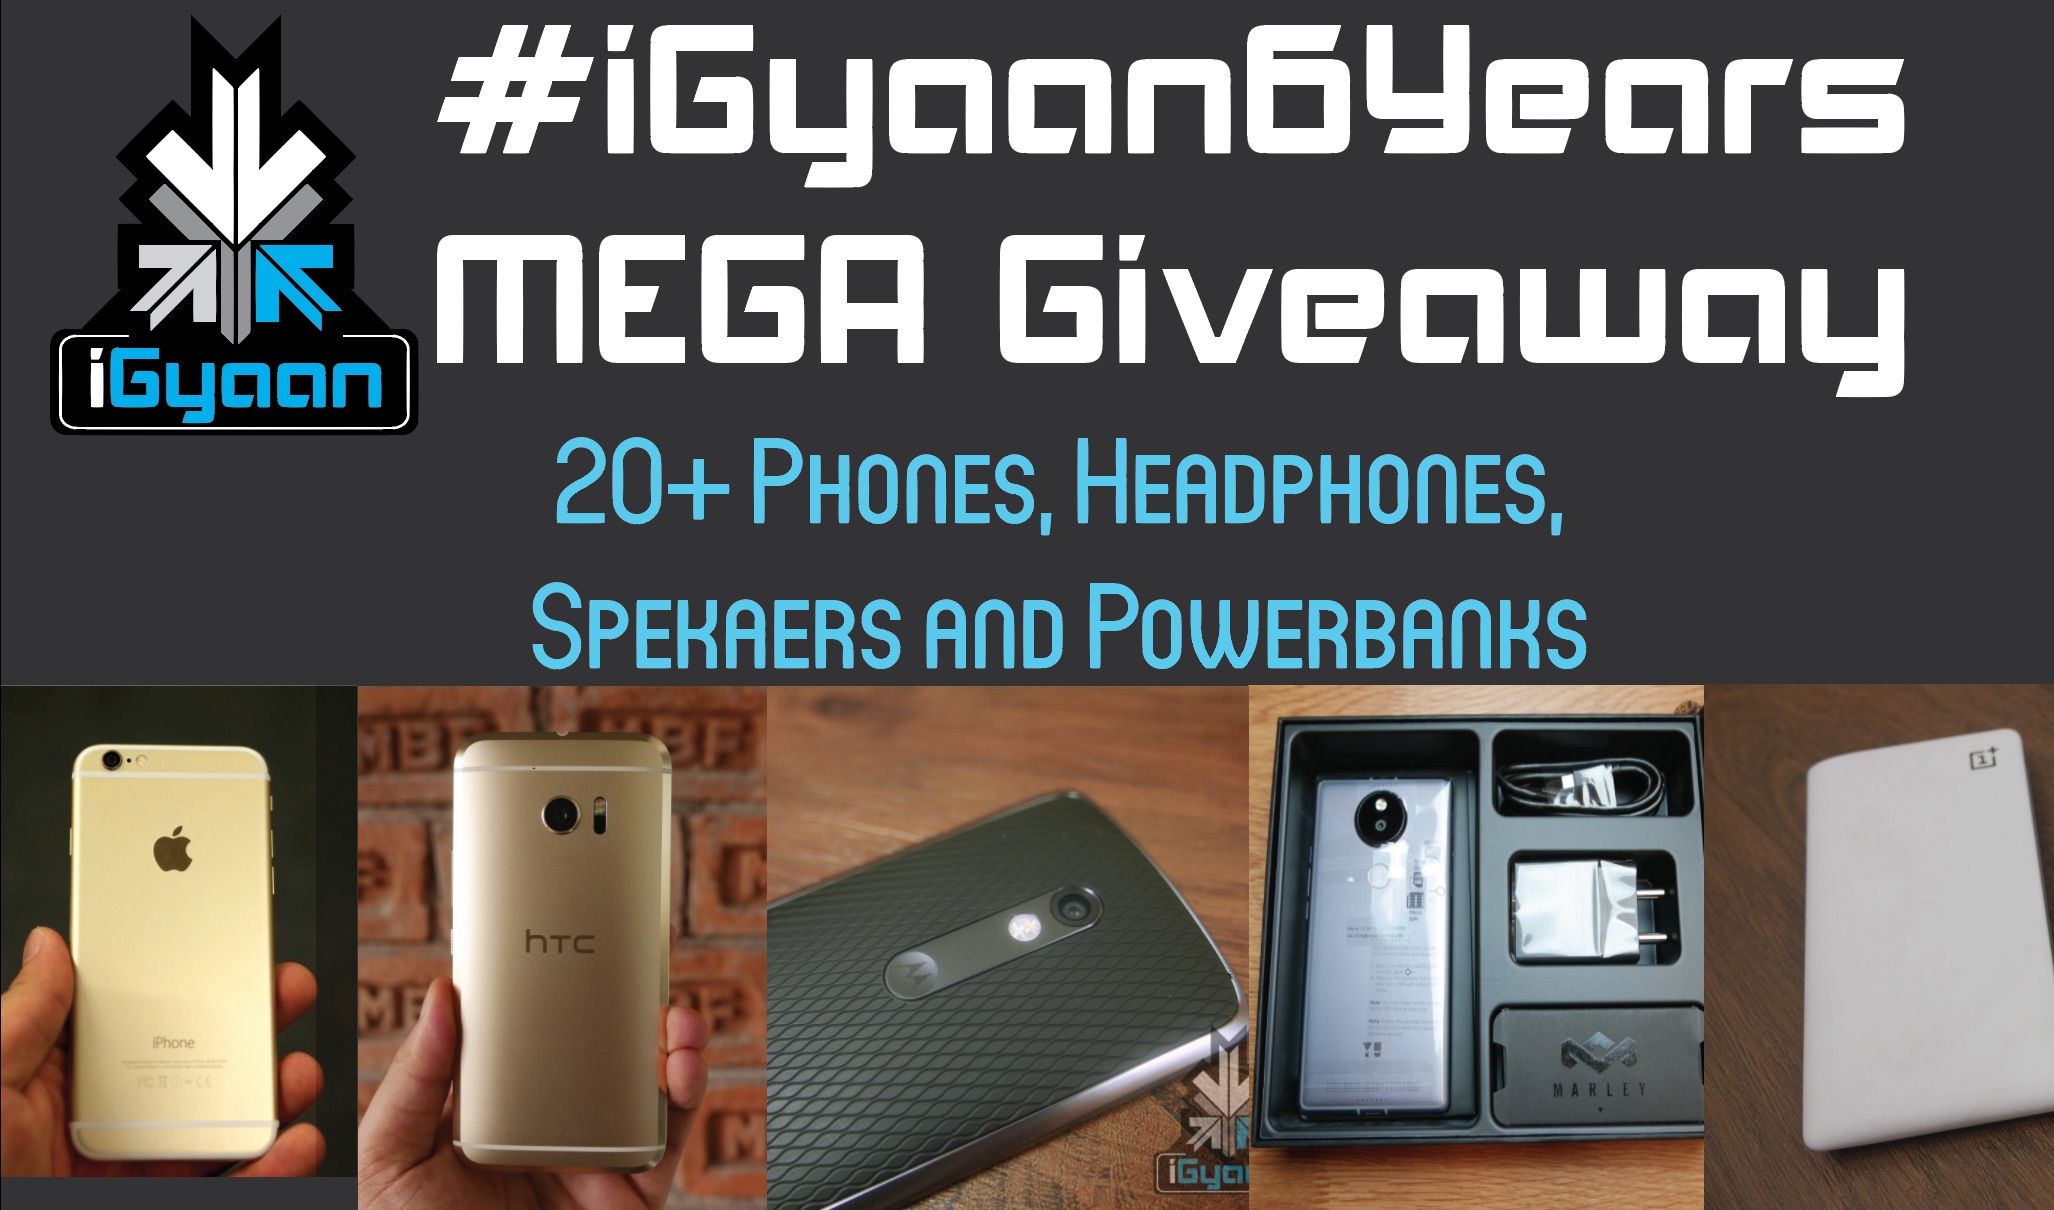 6TH ANNIVERSARY MEGA GIVEAWAY: 1 GIVEAWAY EVERY DAY